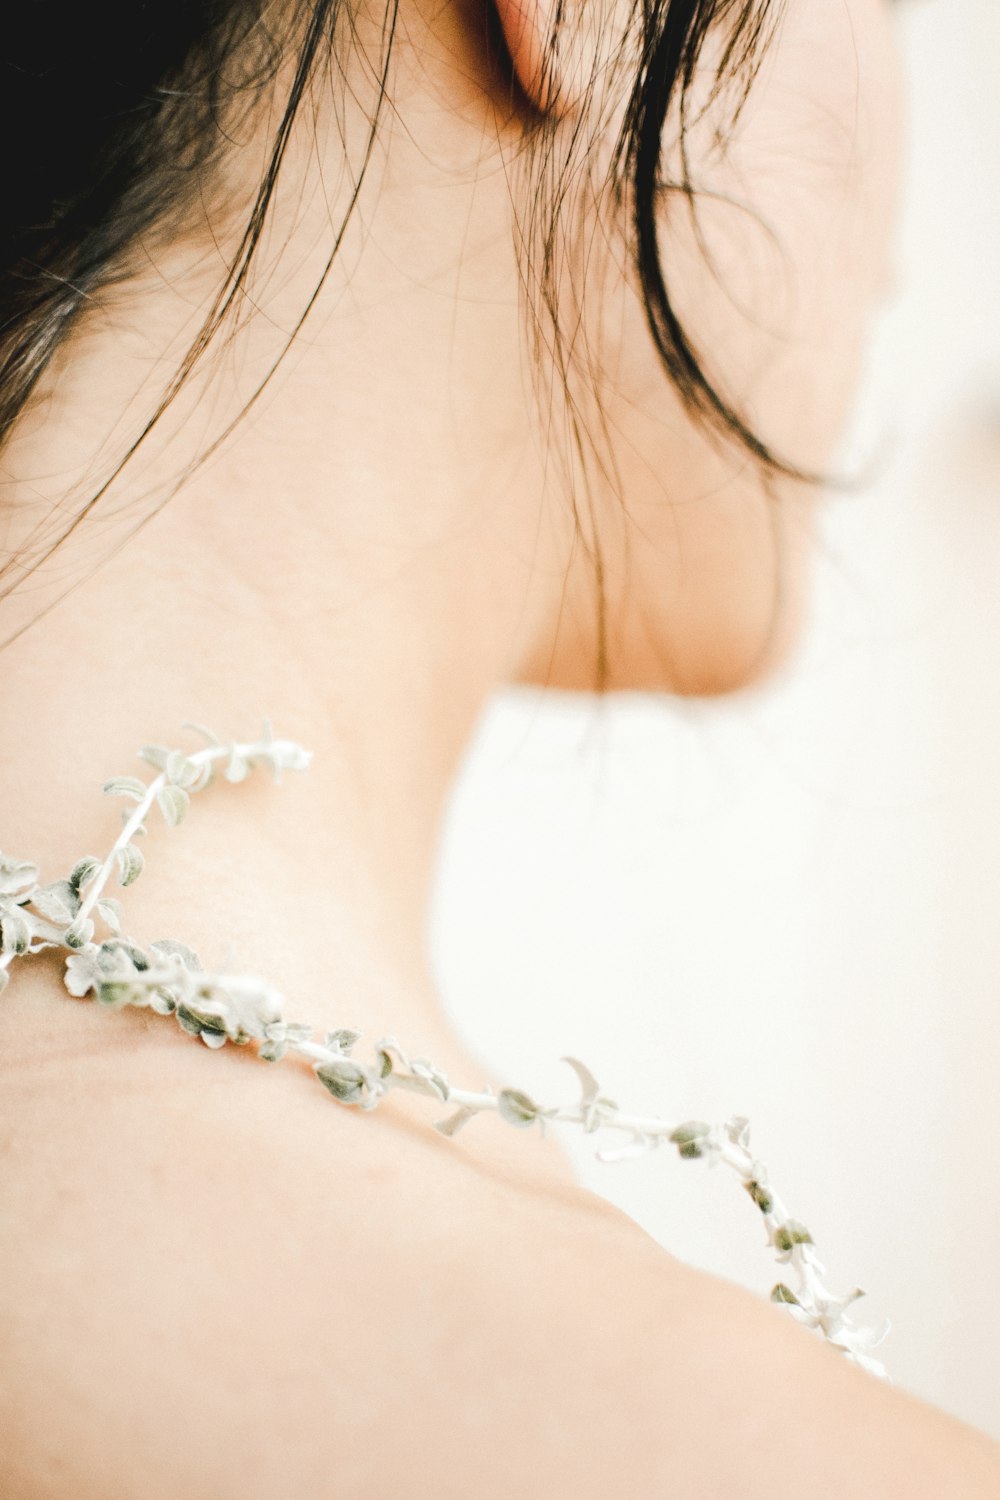 woman wearing white and silver necklace